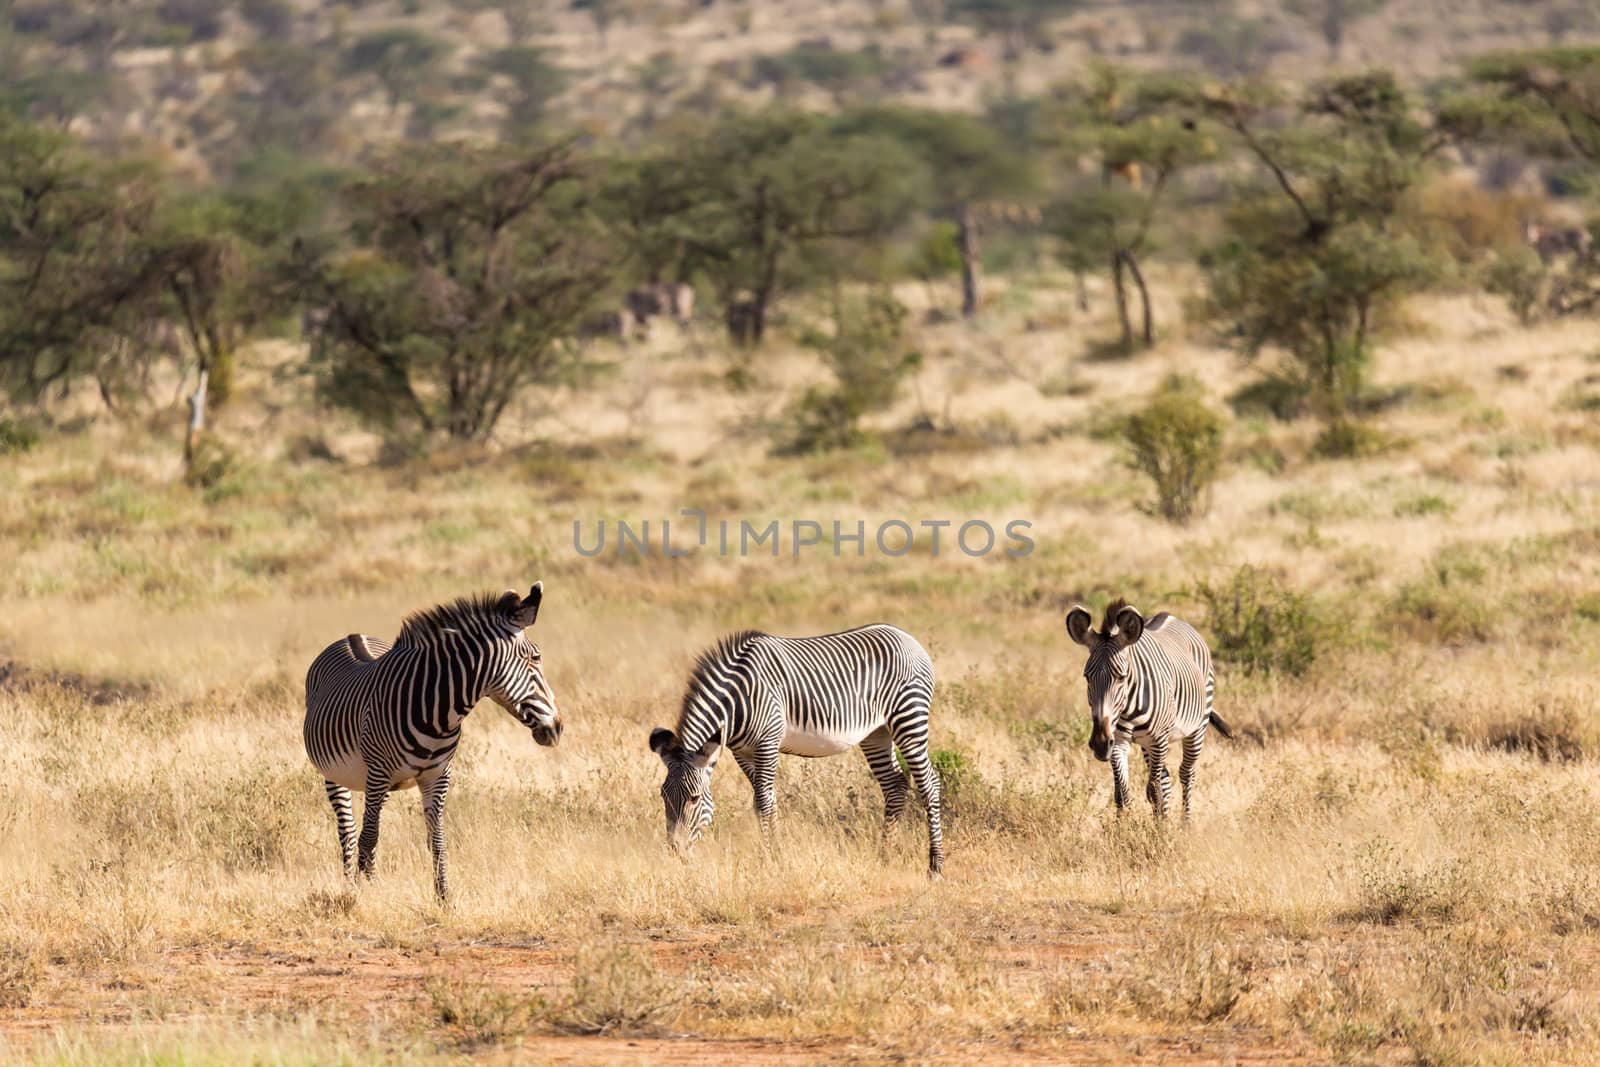 A large herd with zebras grazing in the savannah of Kenya